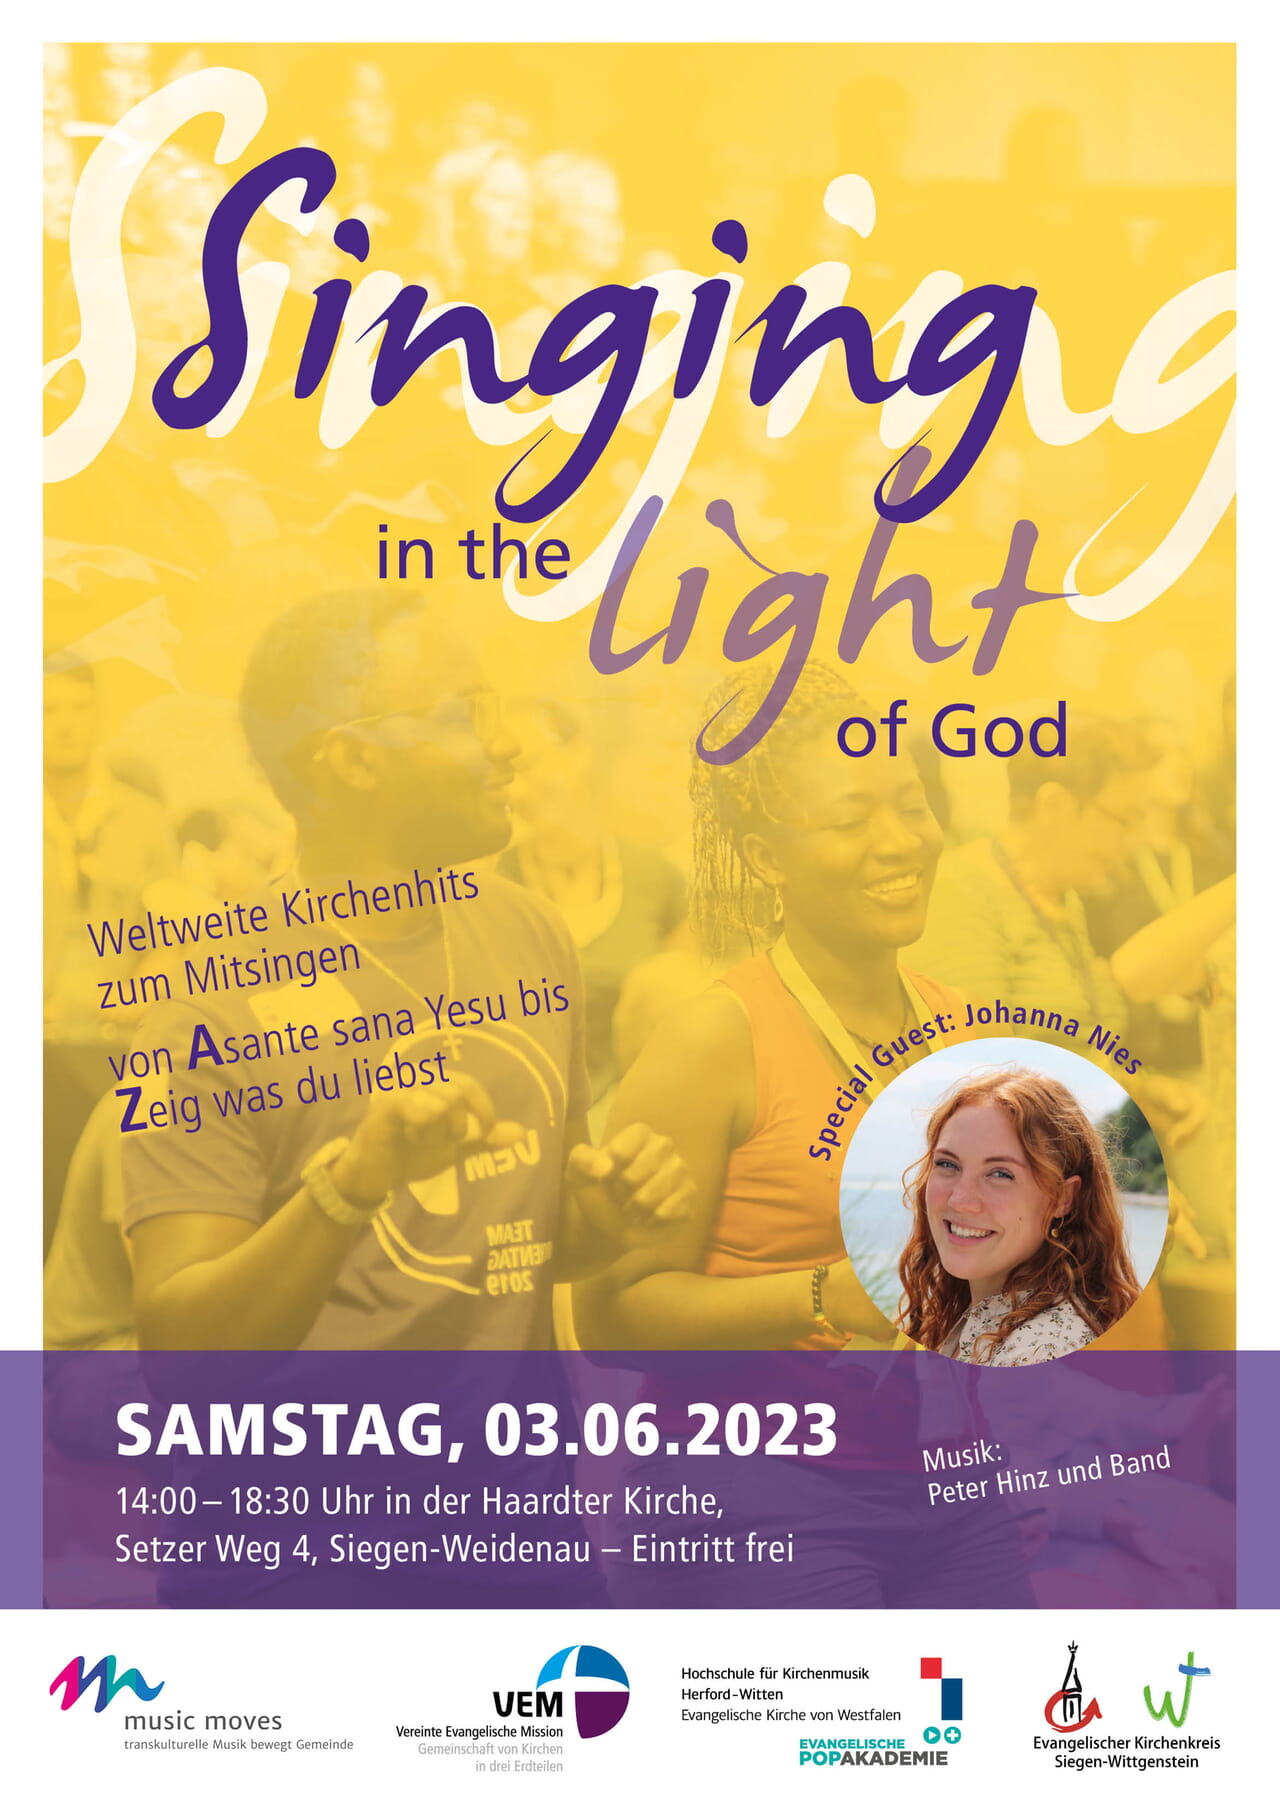 Singing in the light of God